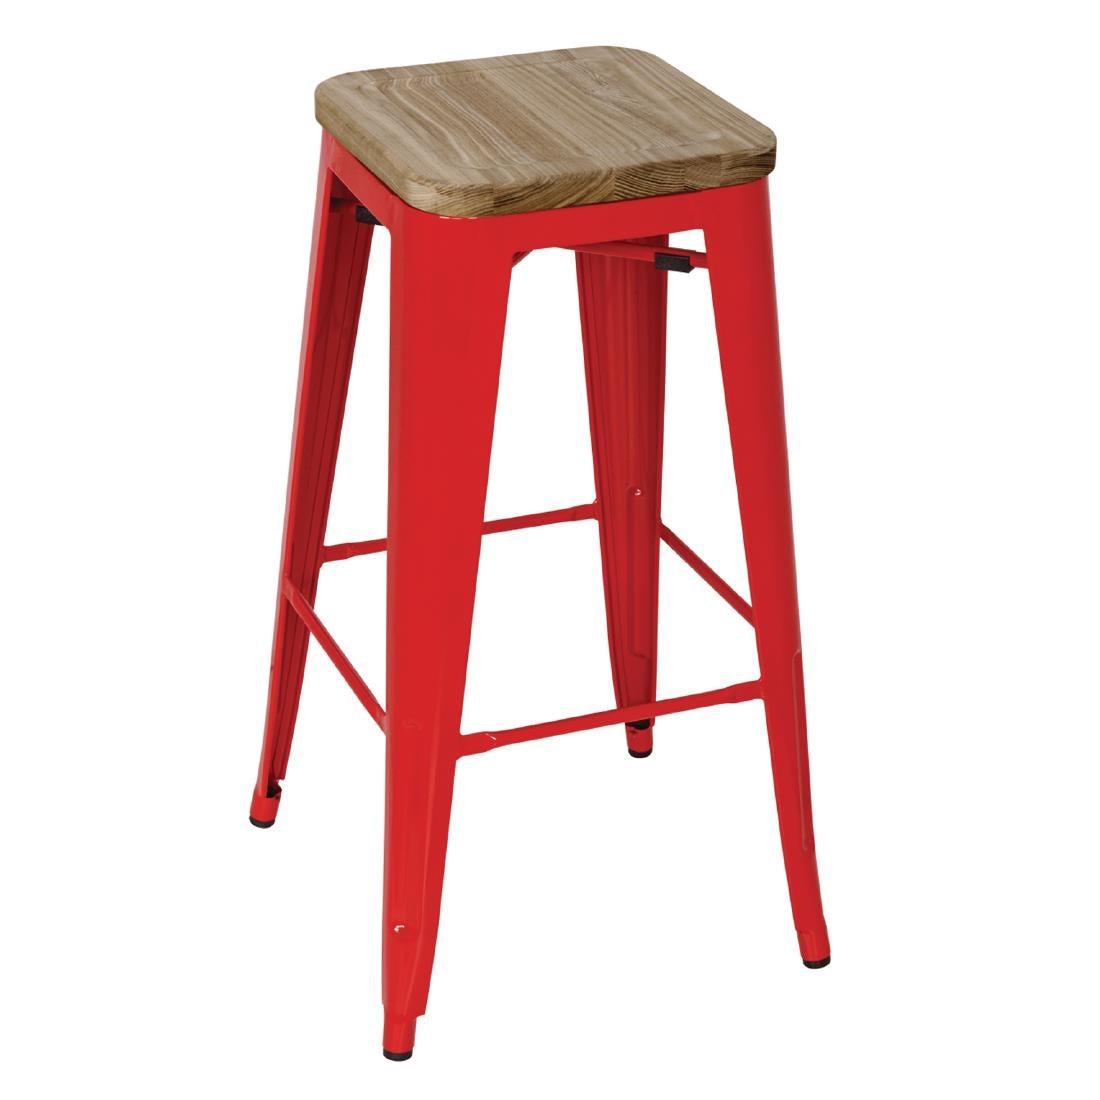 GM641 Bolero Bistro High Stools with Wooden Seat Pad Red (Pack of 4)